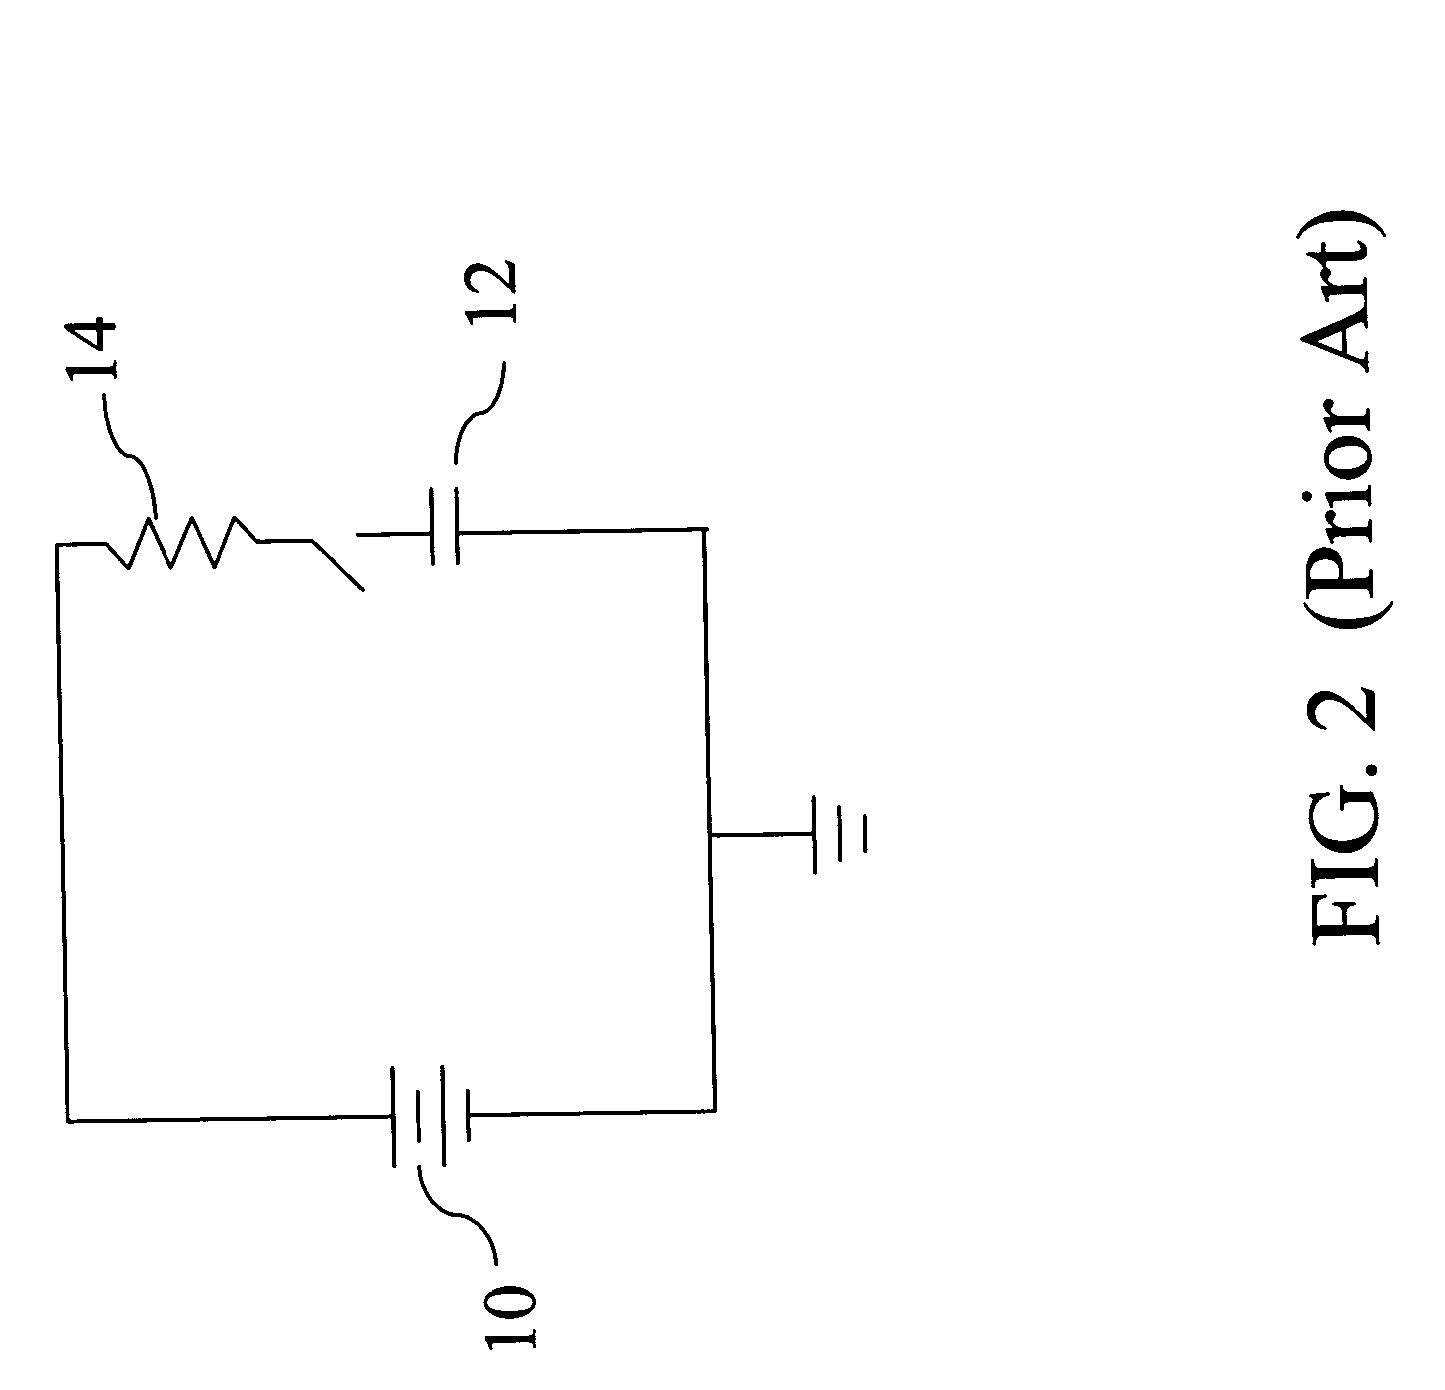 Capacitance charge device with adjustable clamping voltage